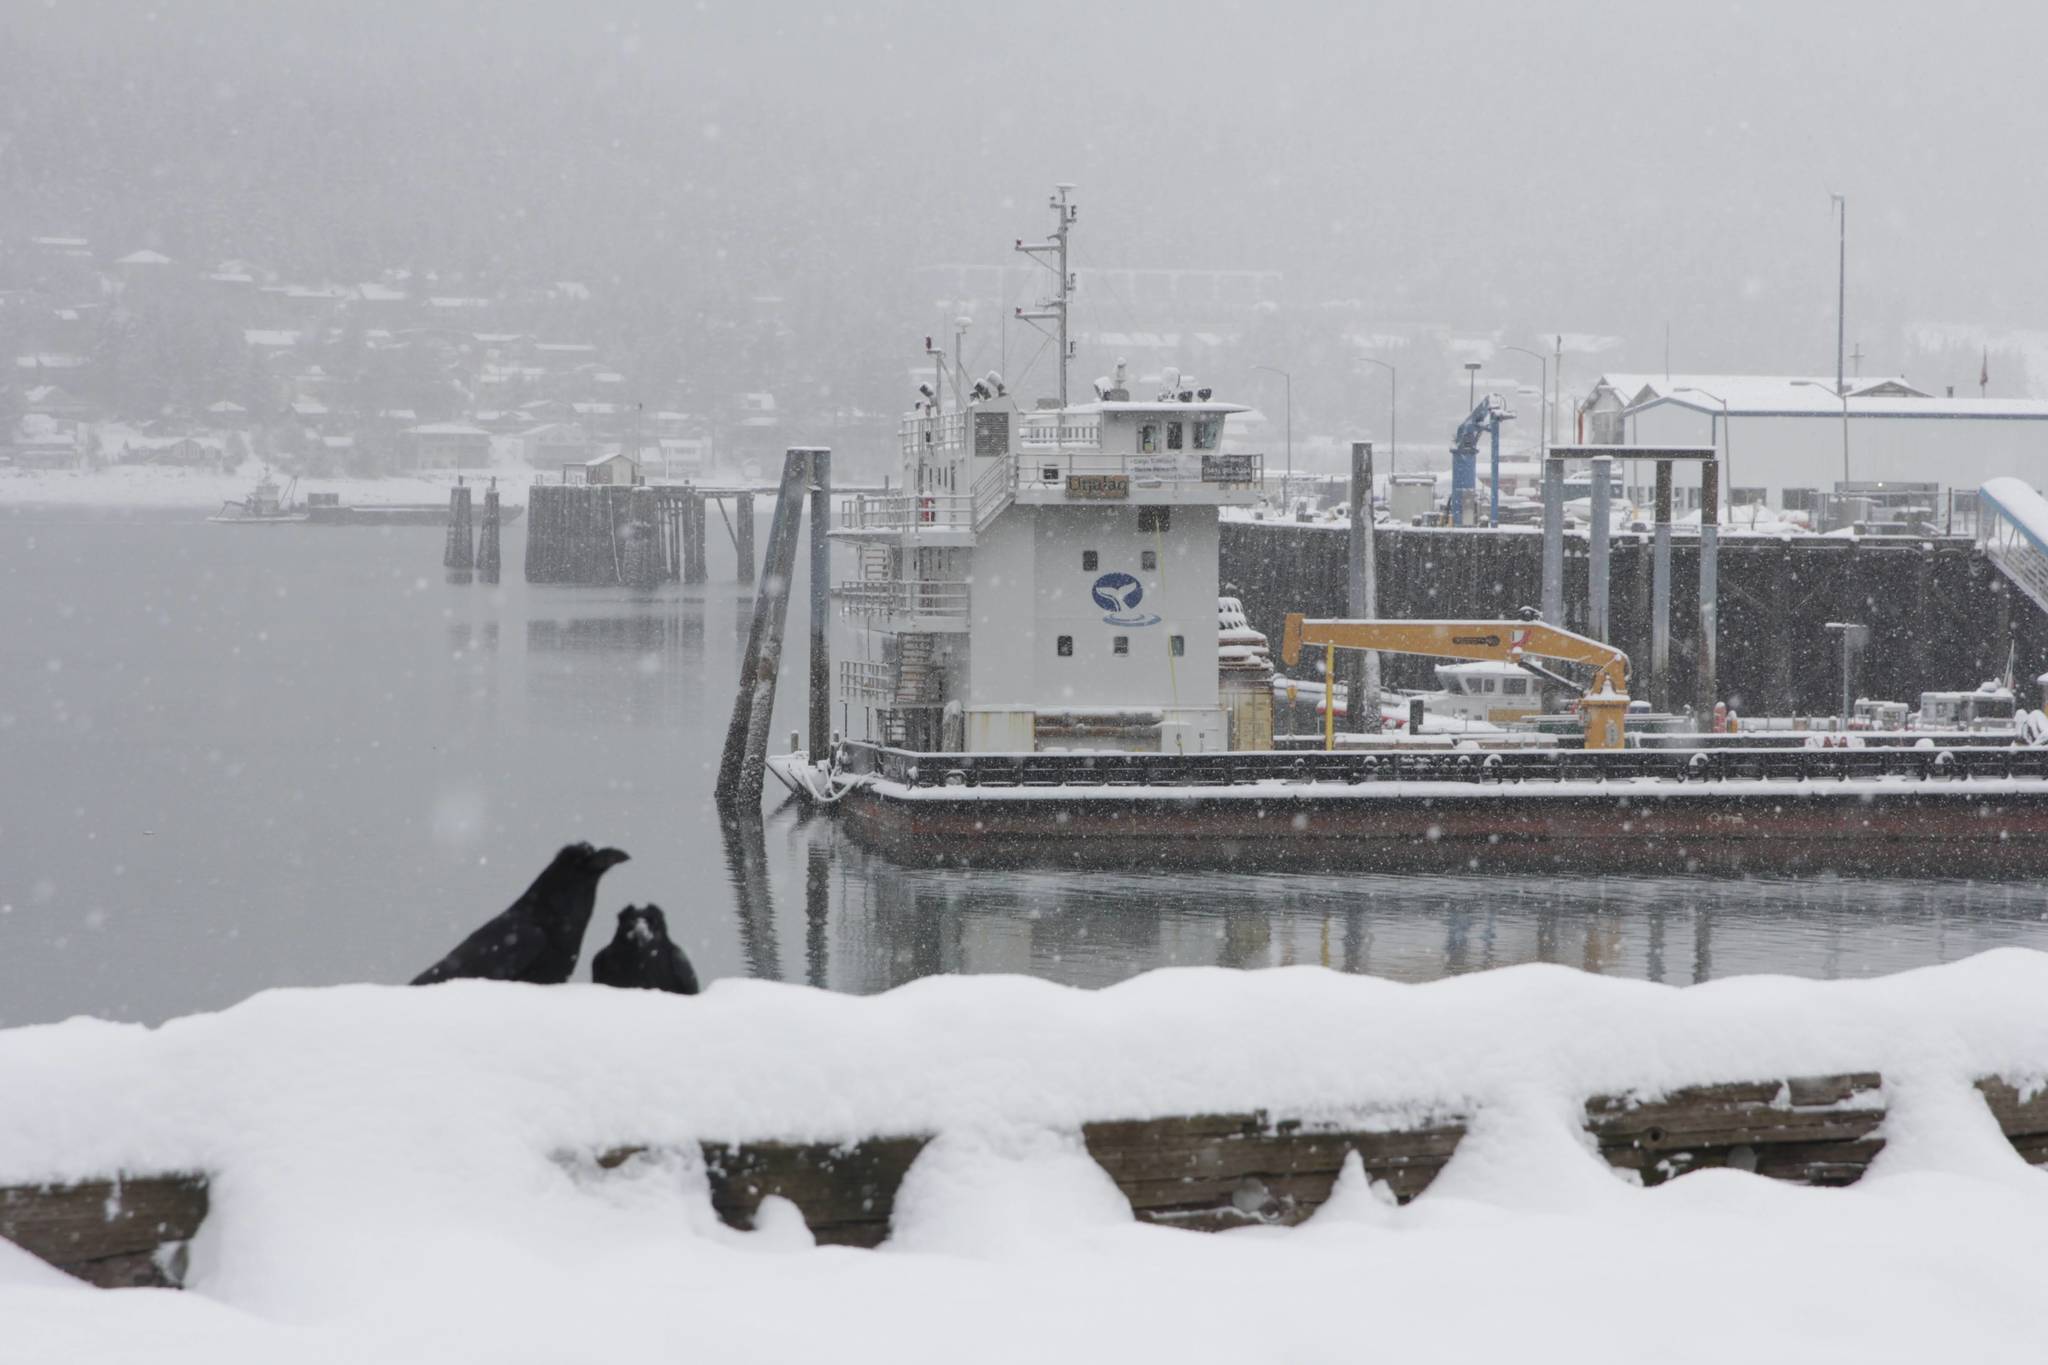 A pair of ravens cast a wary eye about on the downtown waterfront as snow falls across Juneau on Feb. 3, 2021. (Michael S. Lockett / Juneau Empire)